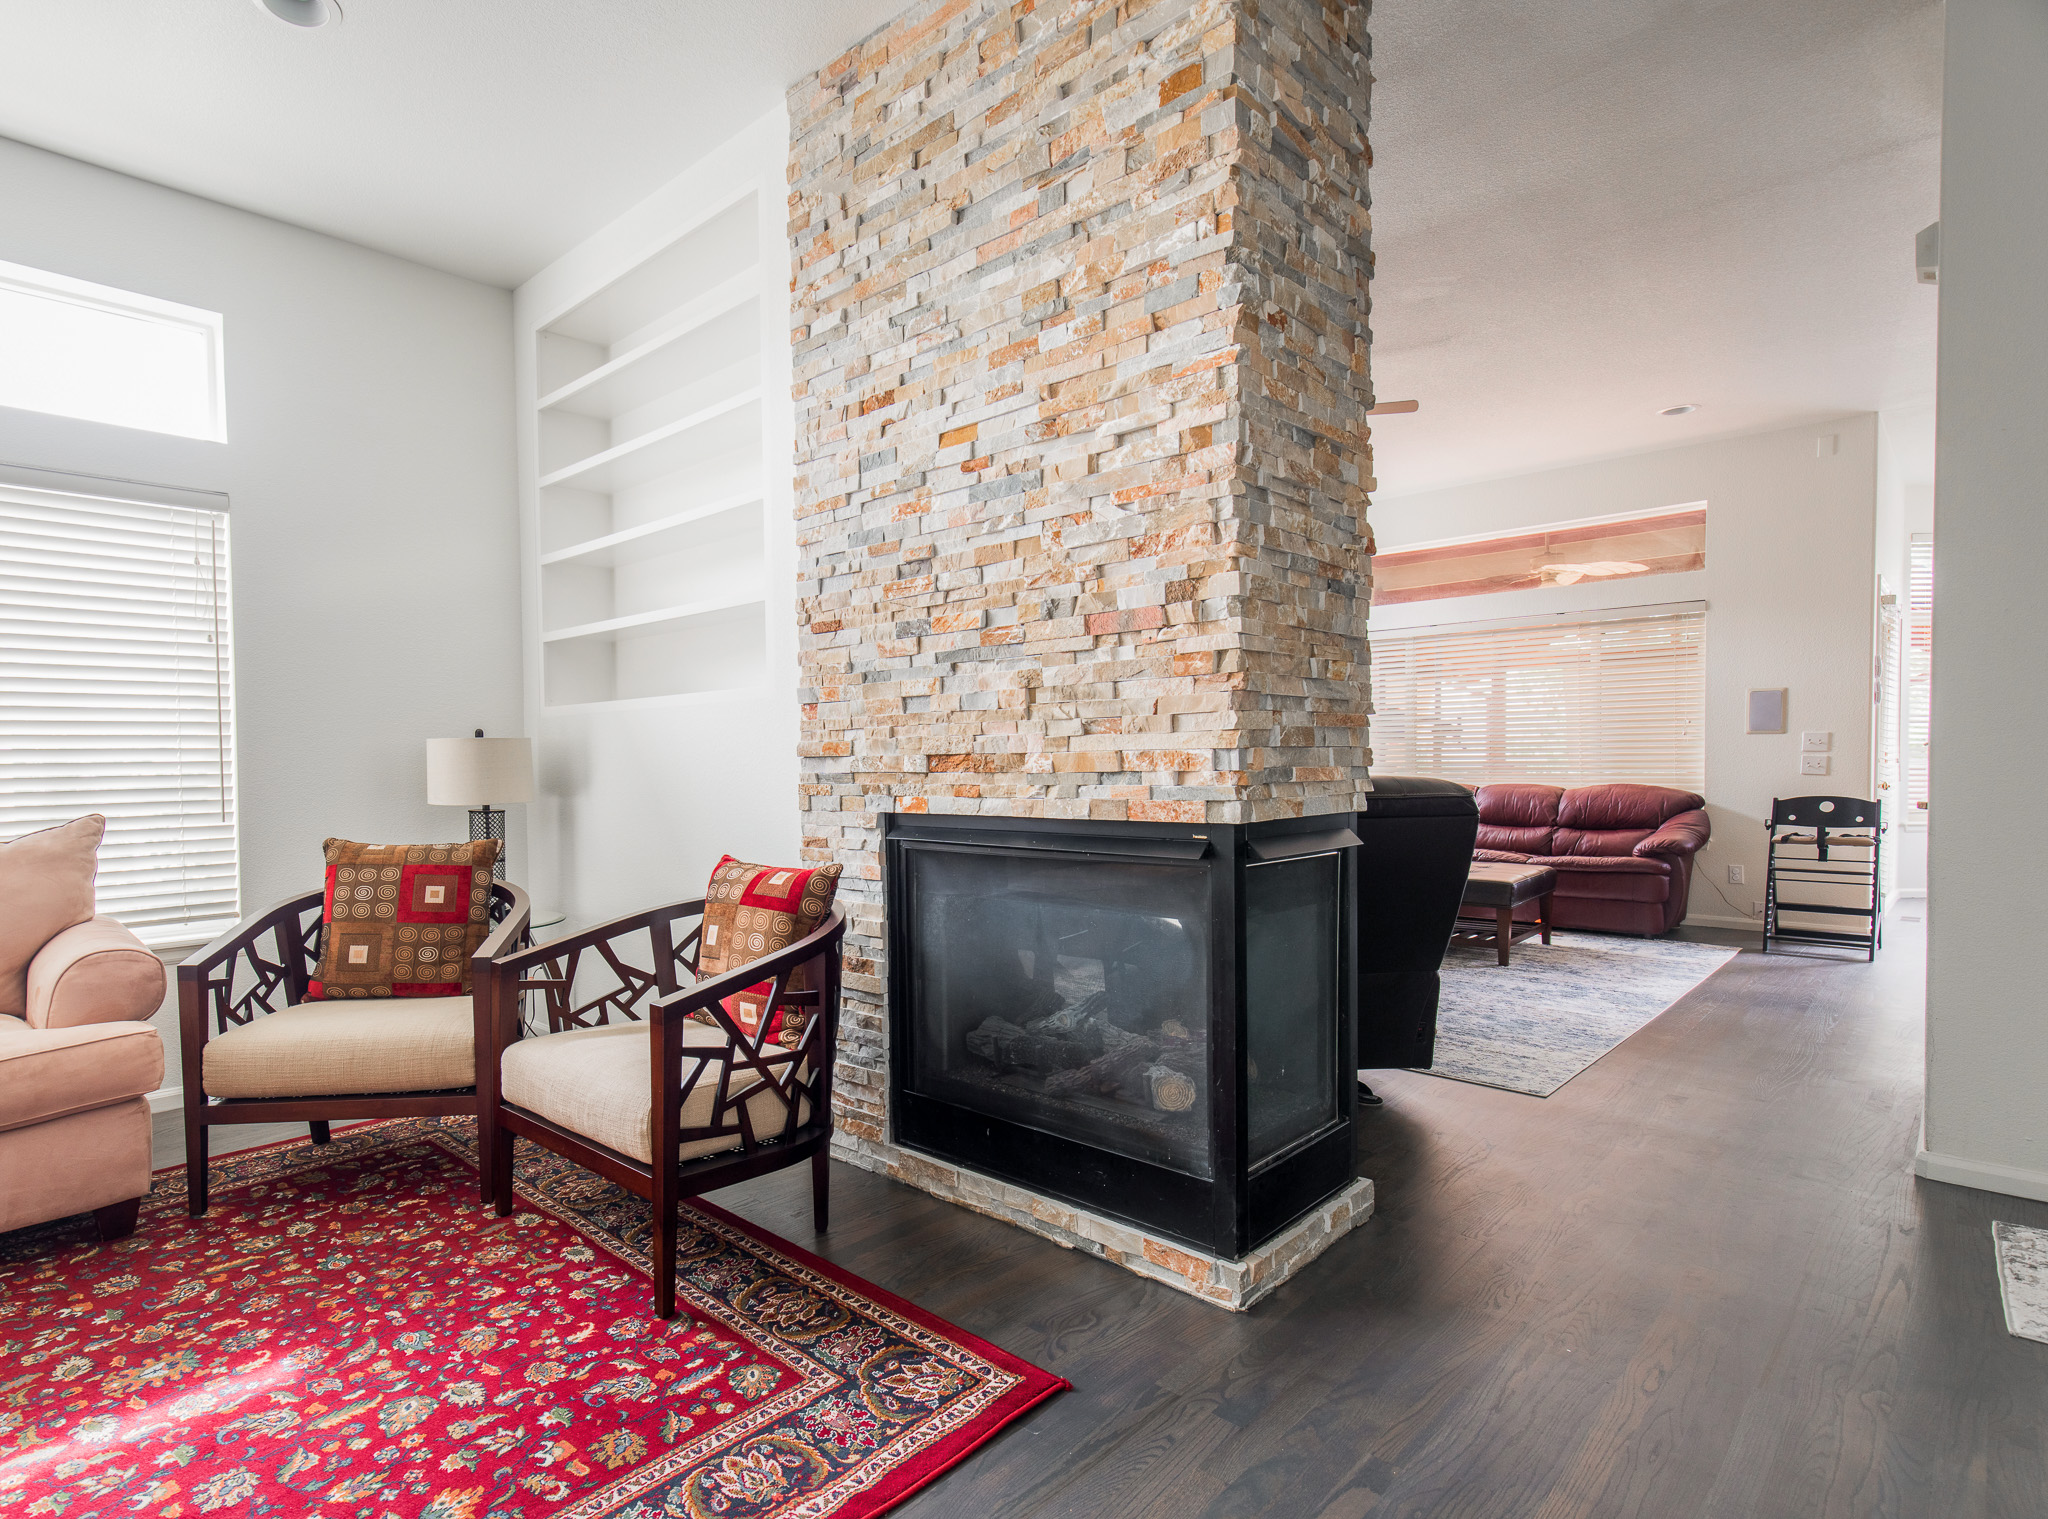 A rustic brick fireplace stands at the center of newly constructed living room complete with furniture and bright red rug.